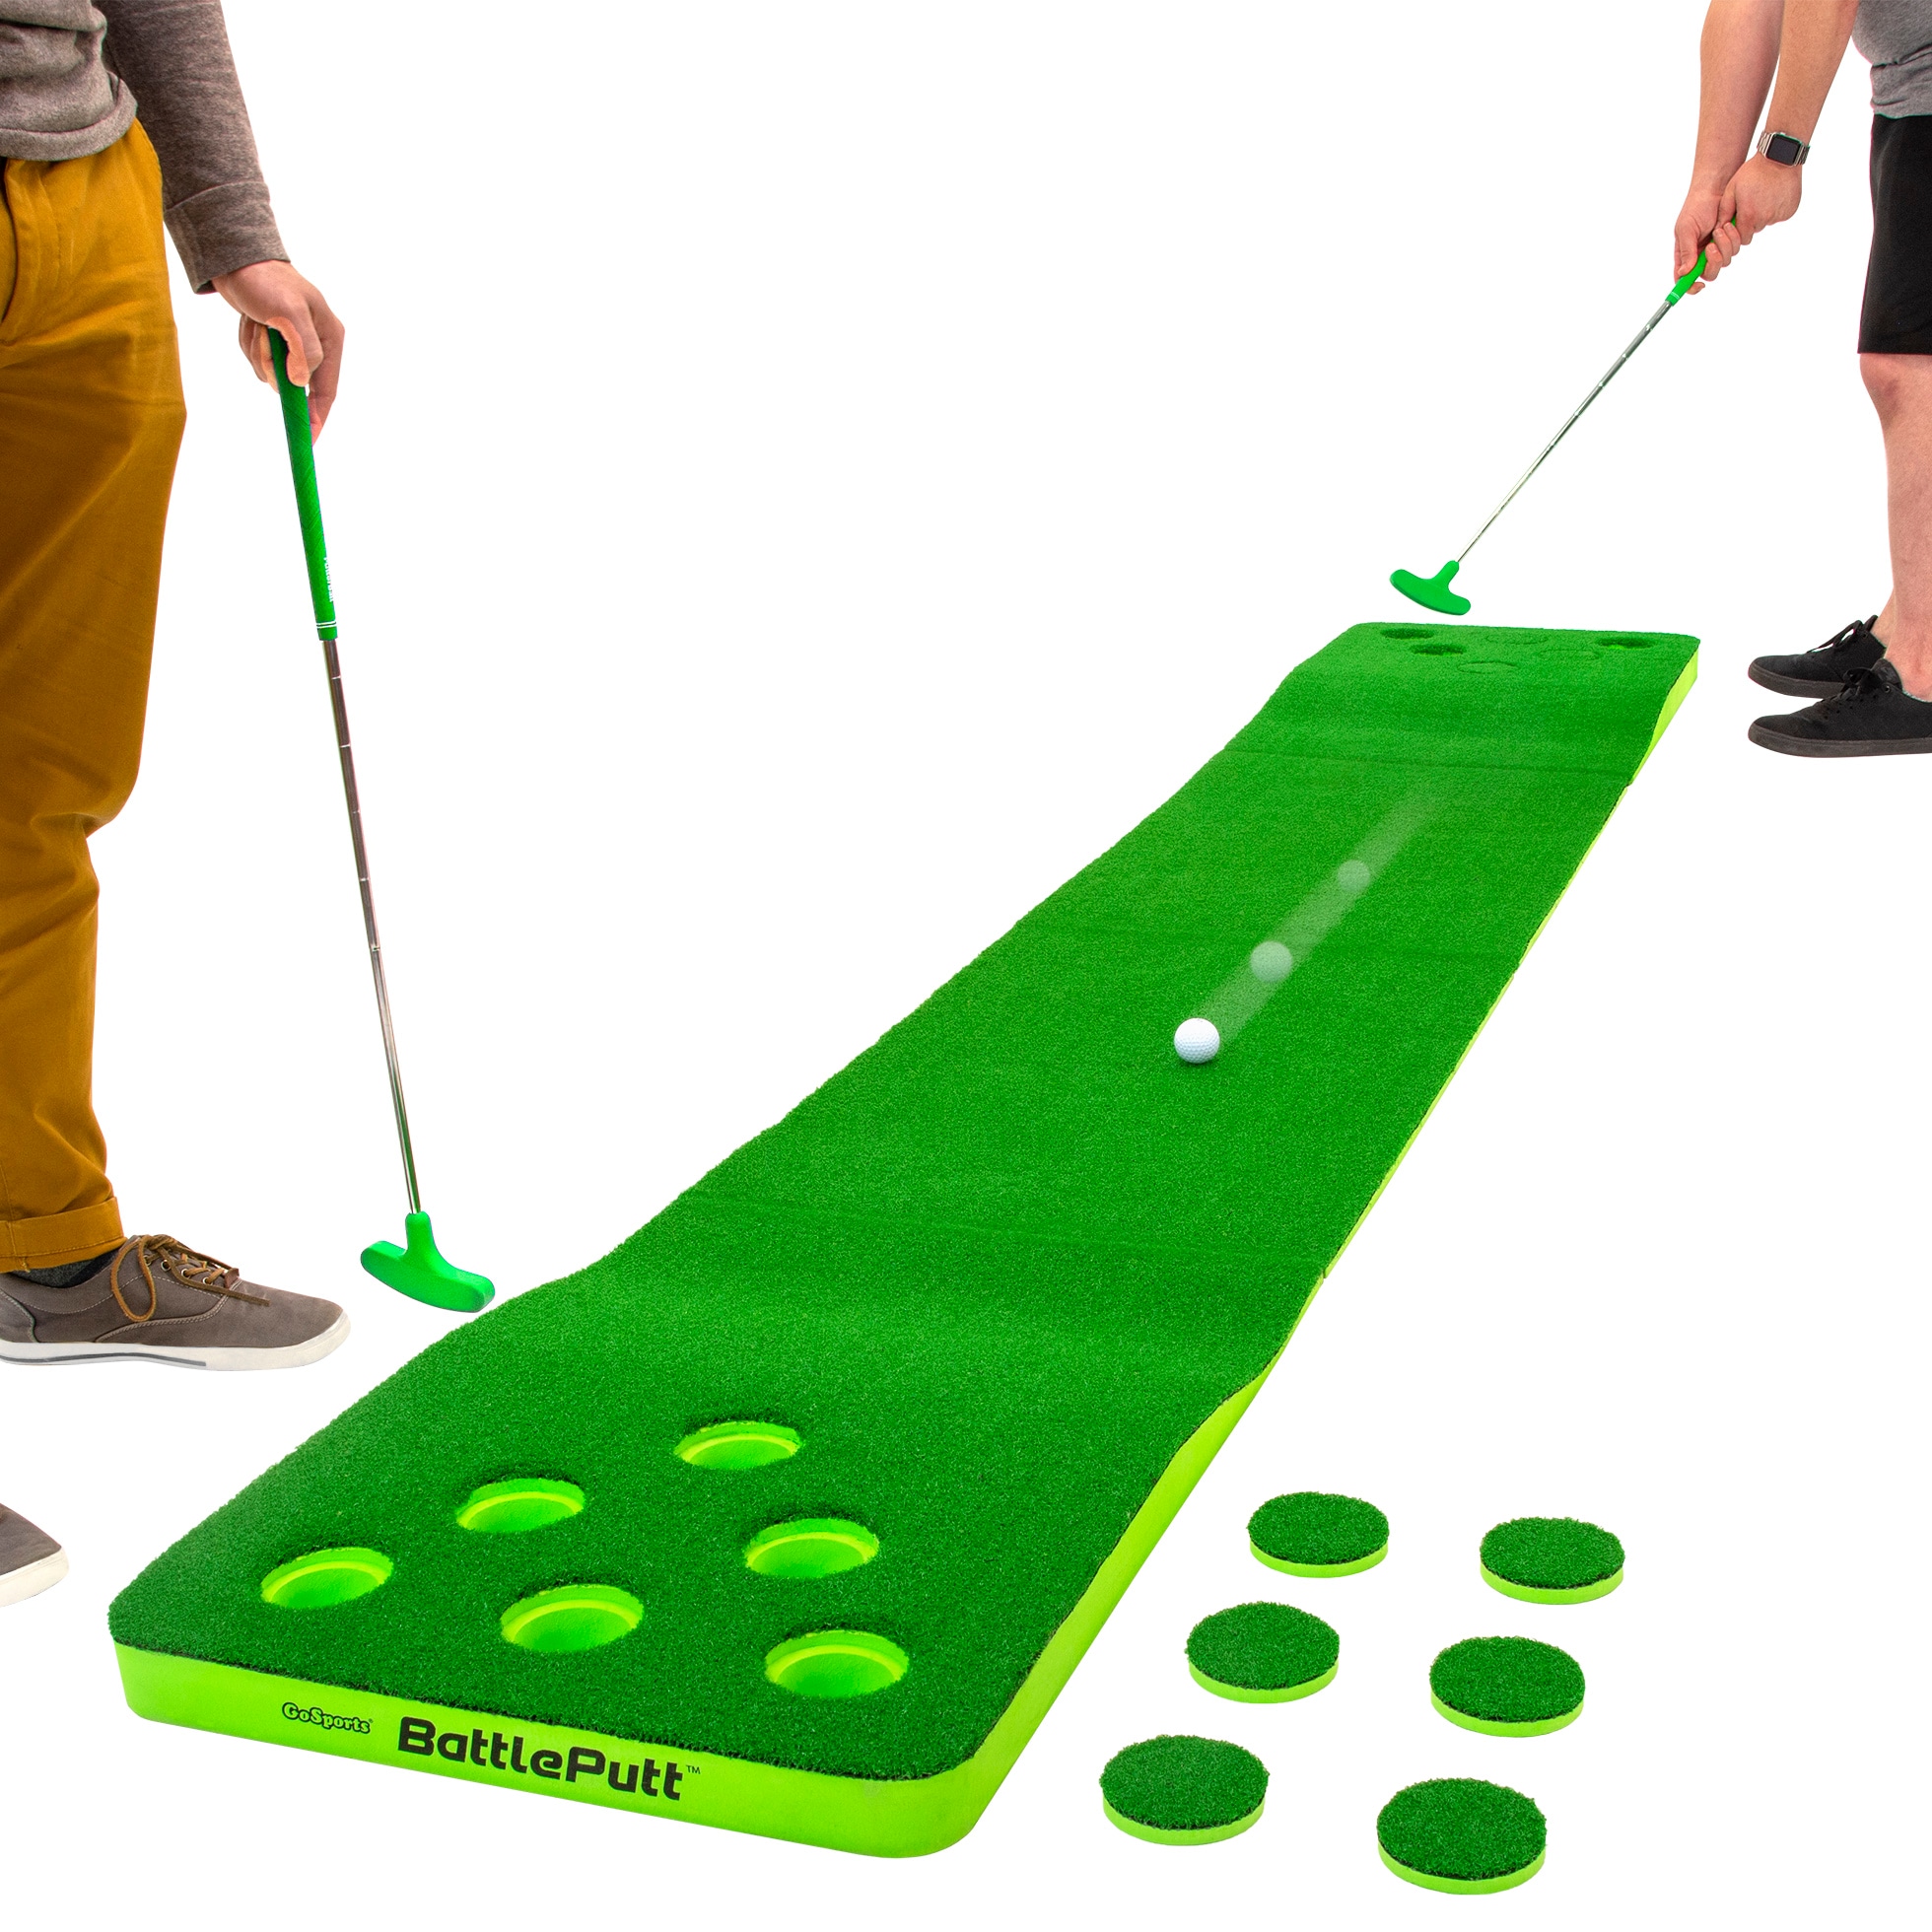 How to Play the Golf Game Called Dots or Garbage